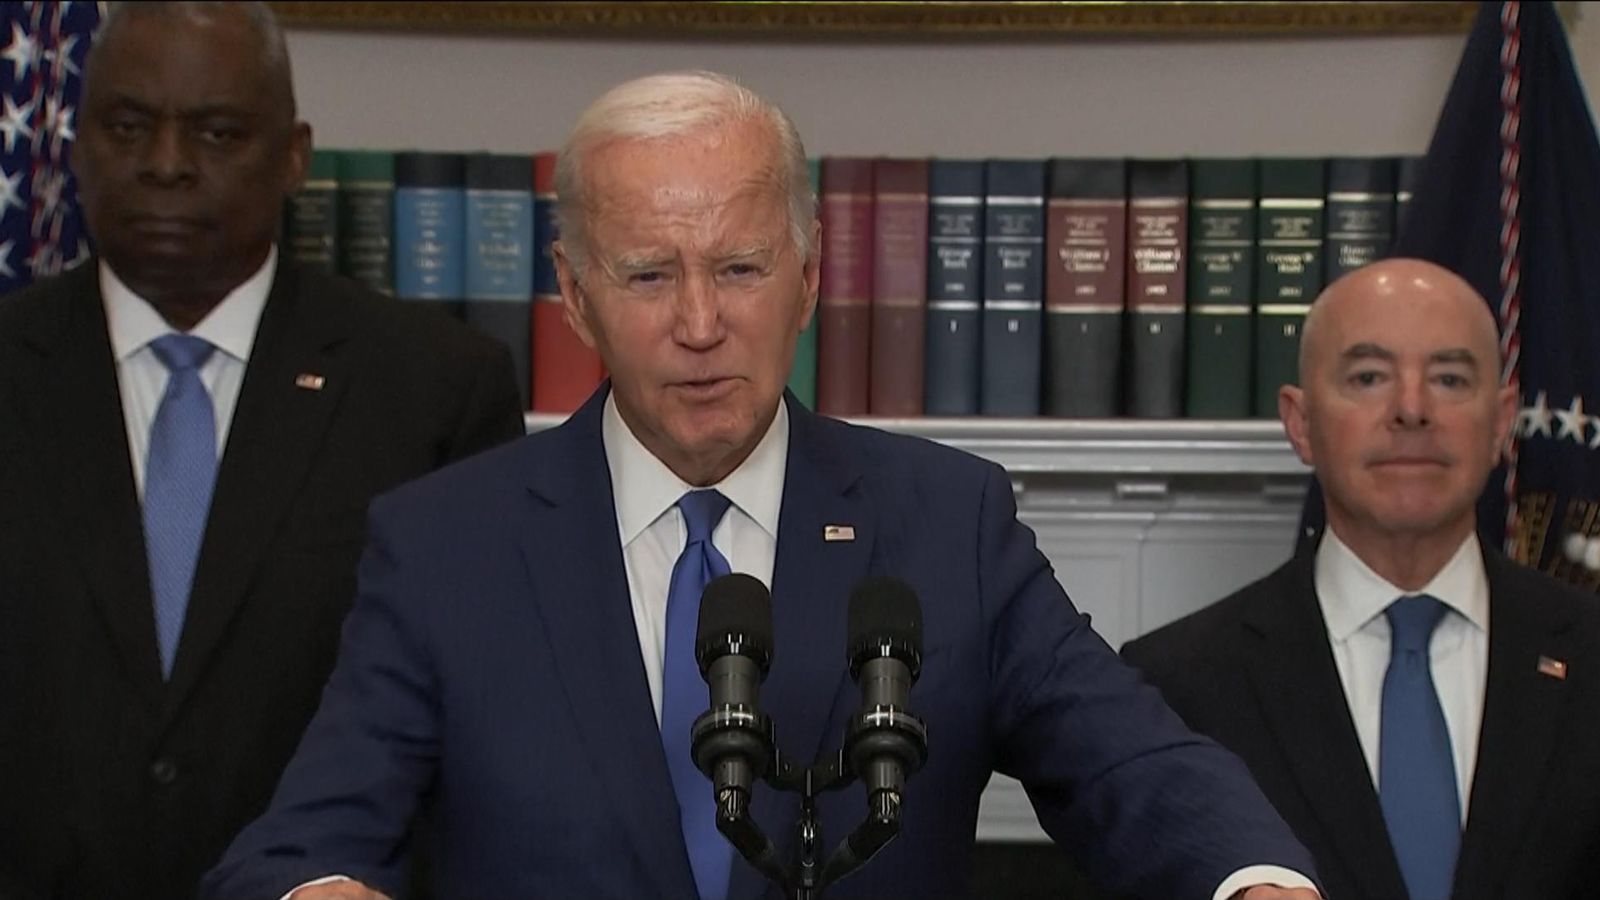 Joe Biden could face impeachment inquiry over family business dealings